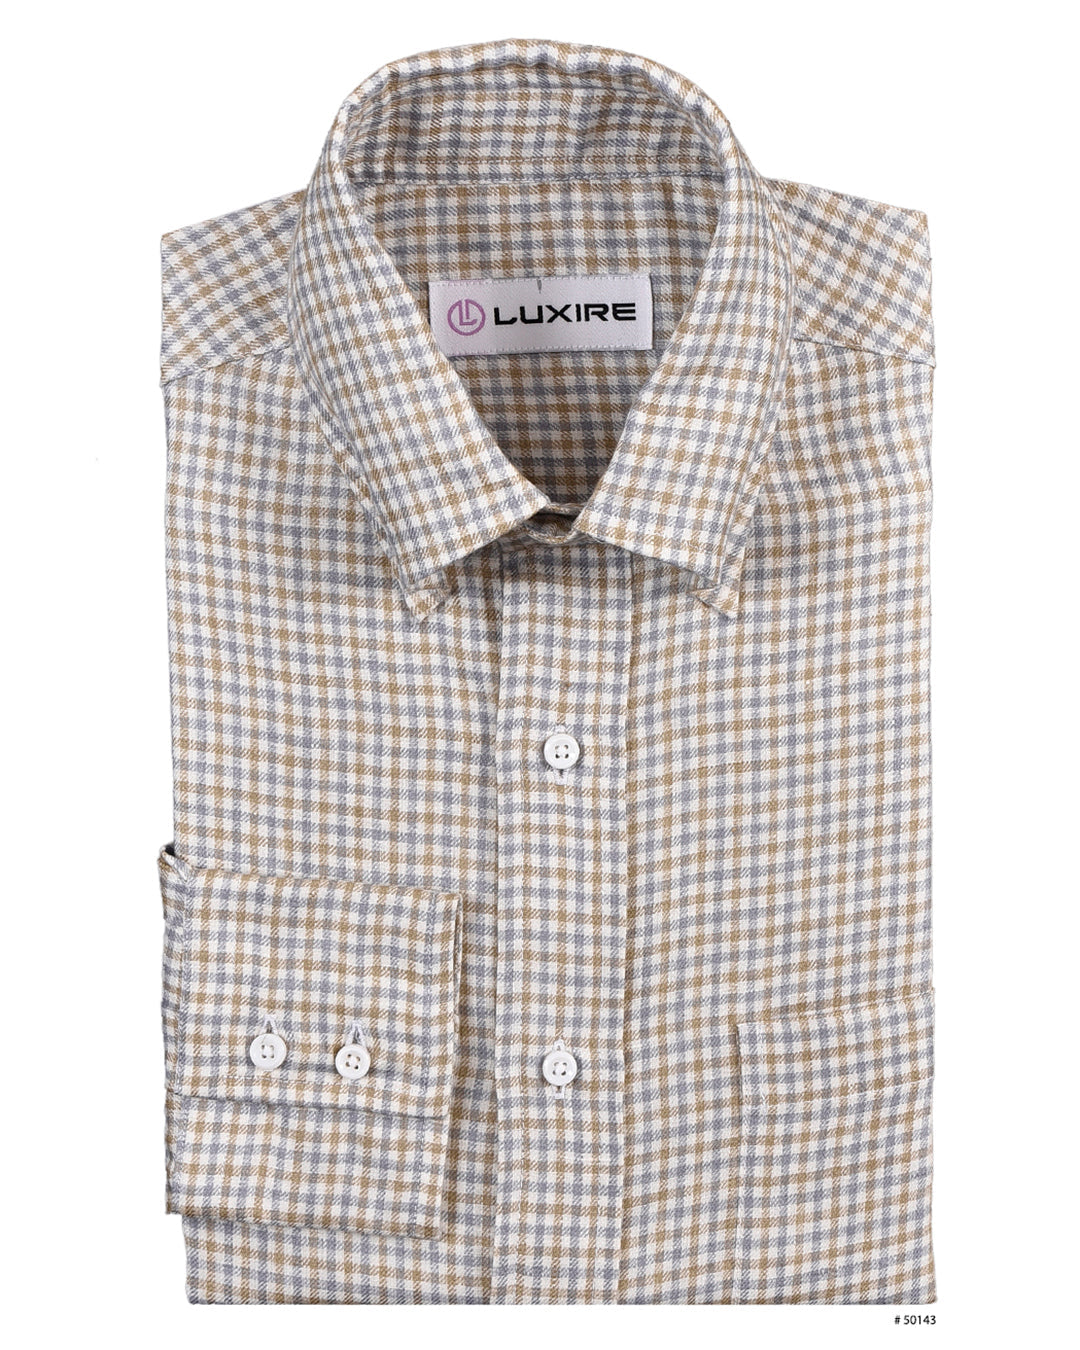 Front of the custom linen shirt for men in brozne and silver checks by Luxire Clothing